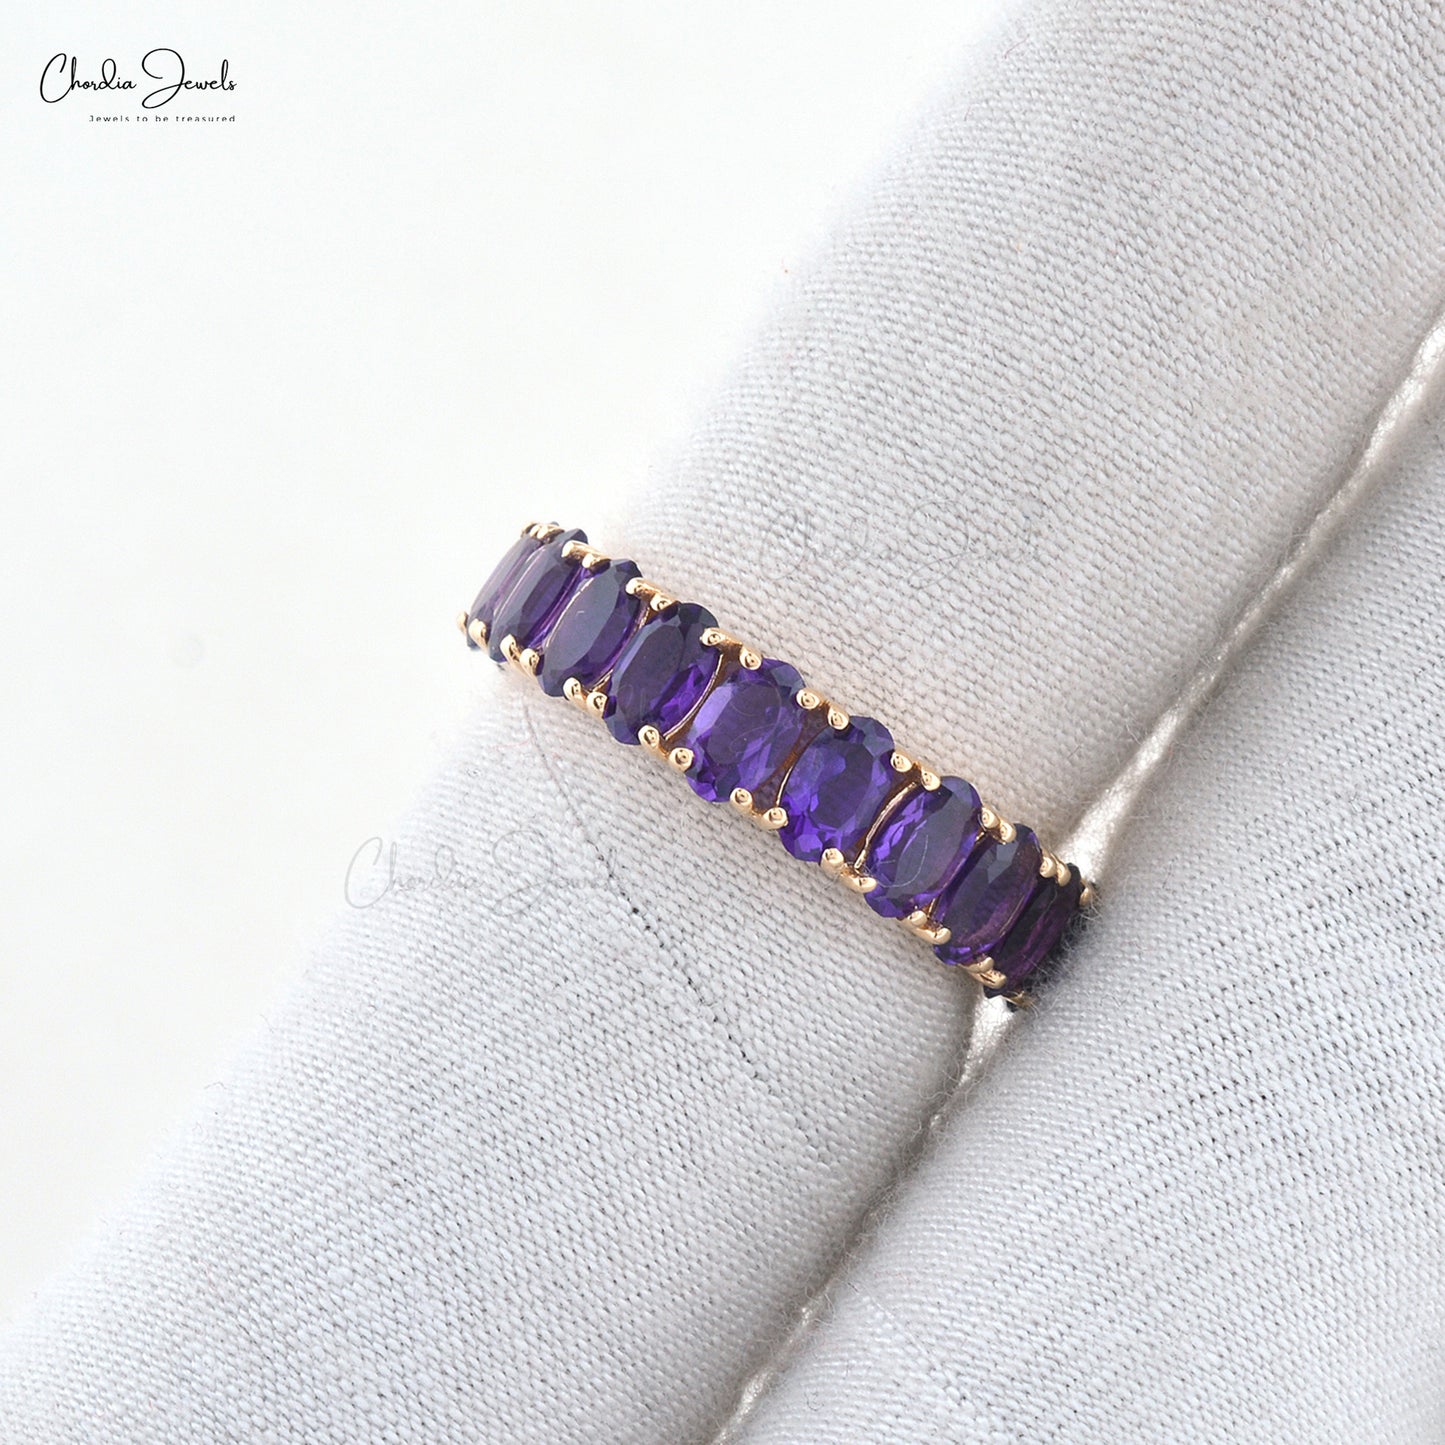 Load image into Gallery viewer, Exquisite 14k Real Rose Gold Eternity Band Genuine Amethyst Gemstone Shared Prong Ring
